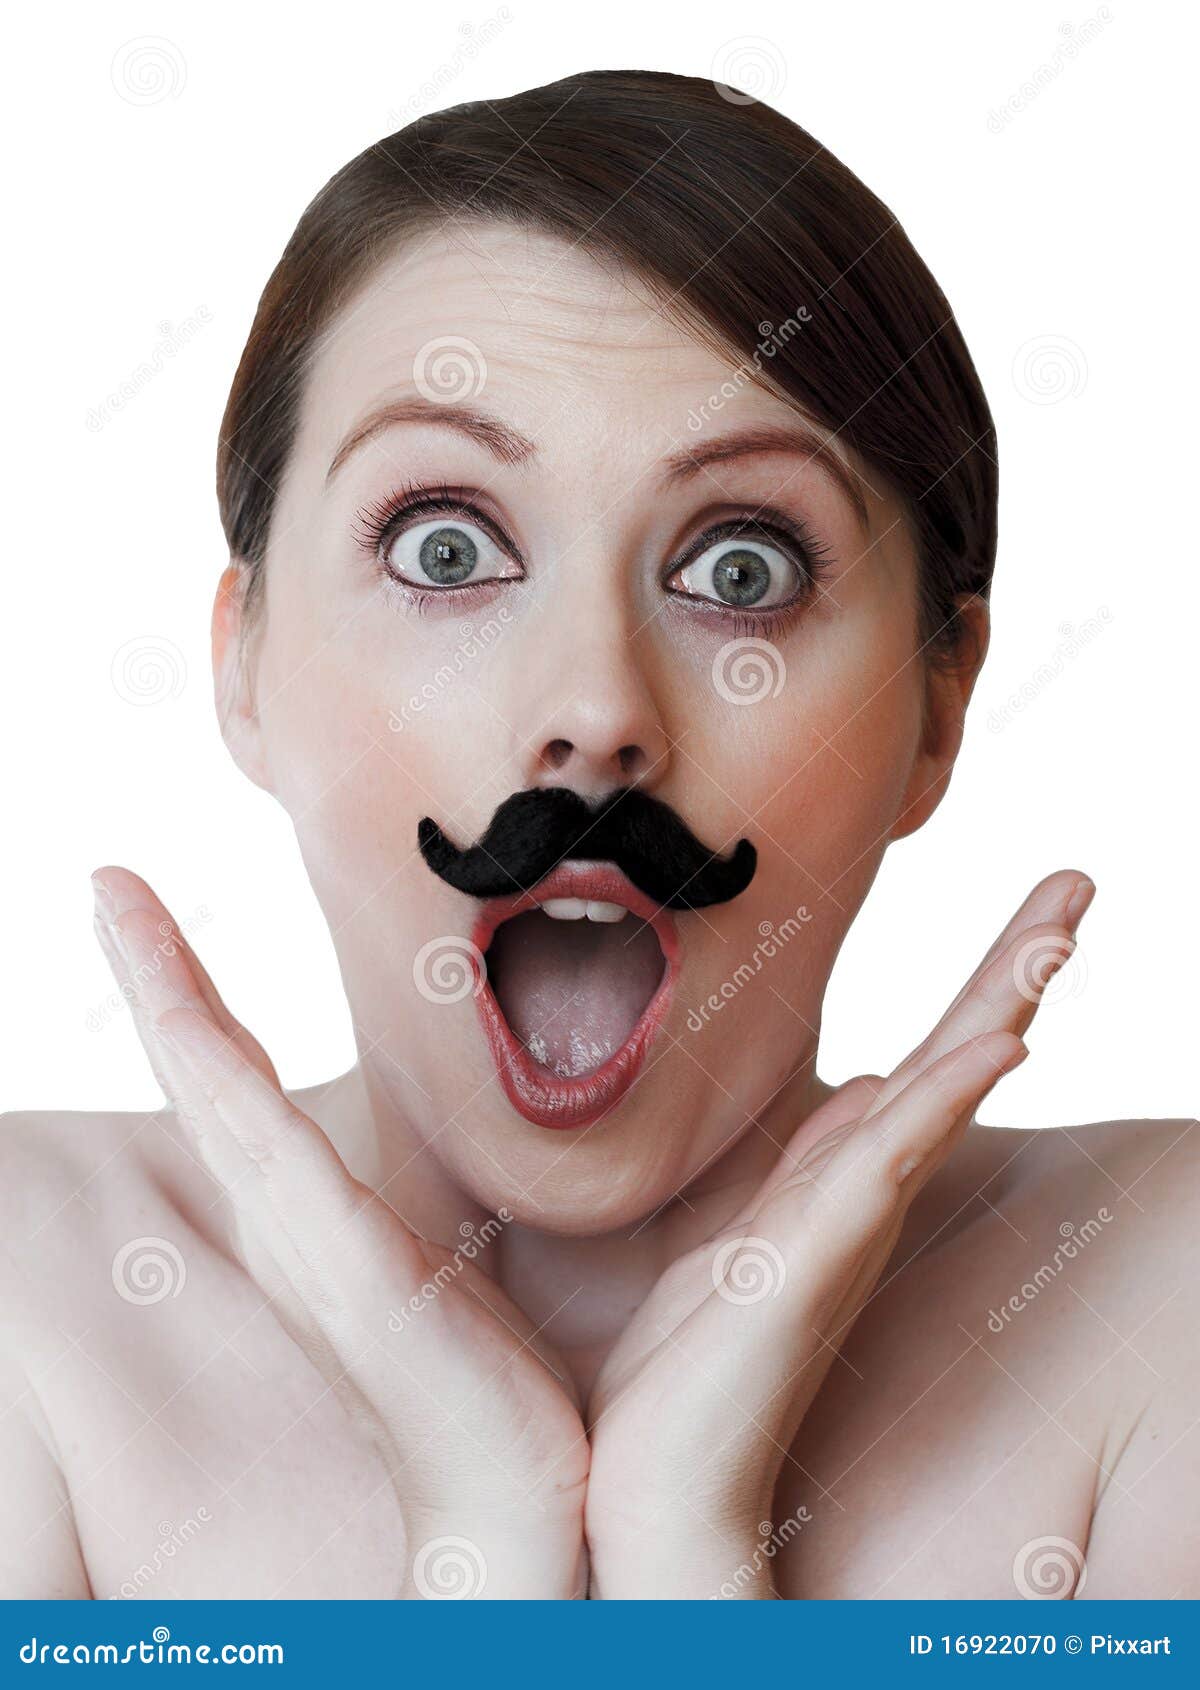 amazed young woman with moustache; 